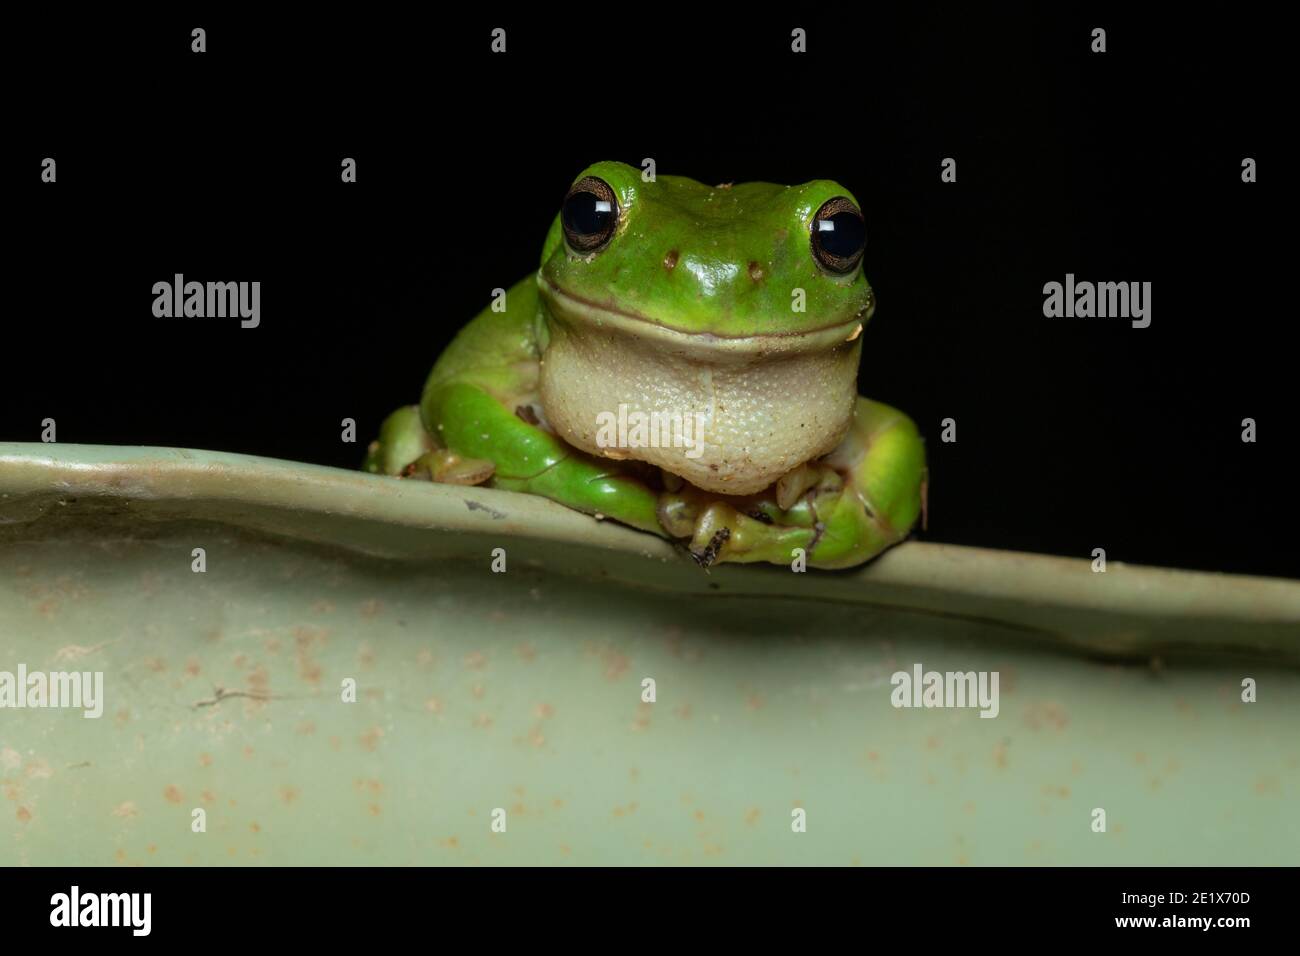 Green tree frog (Litoria caerulea) sitting on water tank and smiling at Hasties Swamp, Atherton, Queensland, Australia. Stock Photo